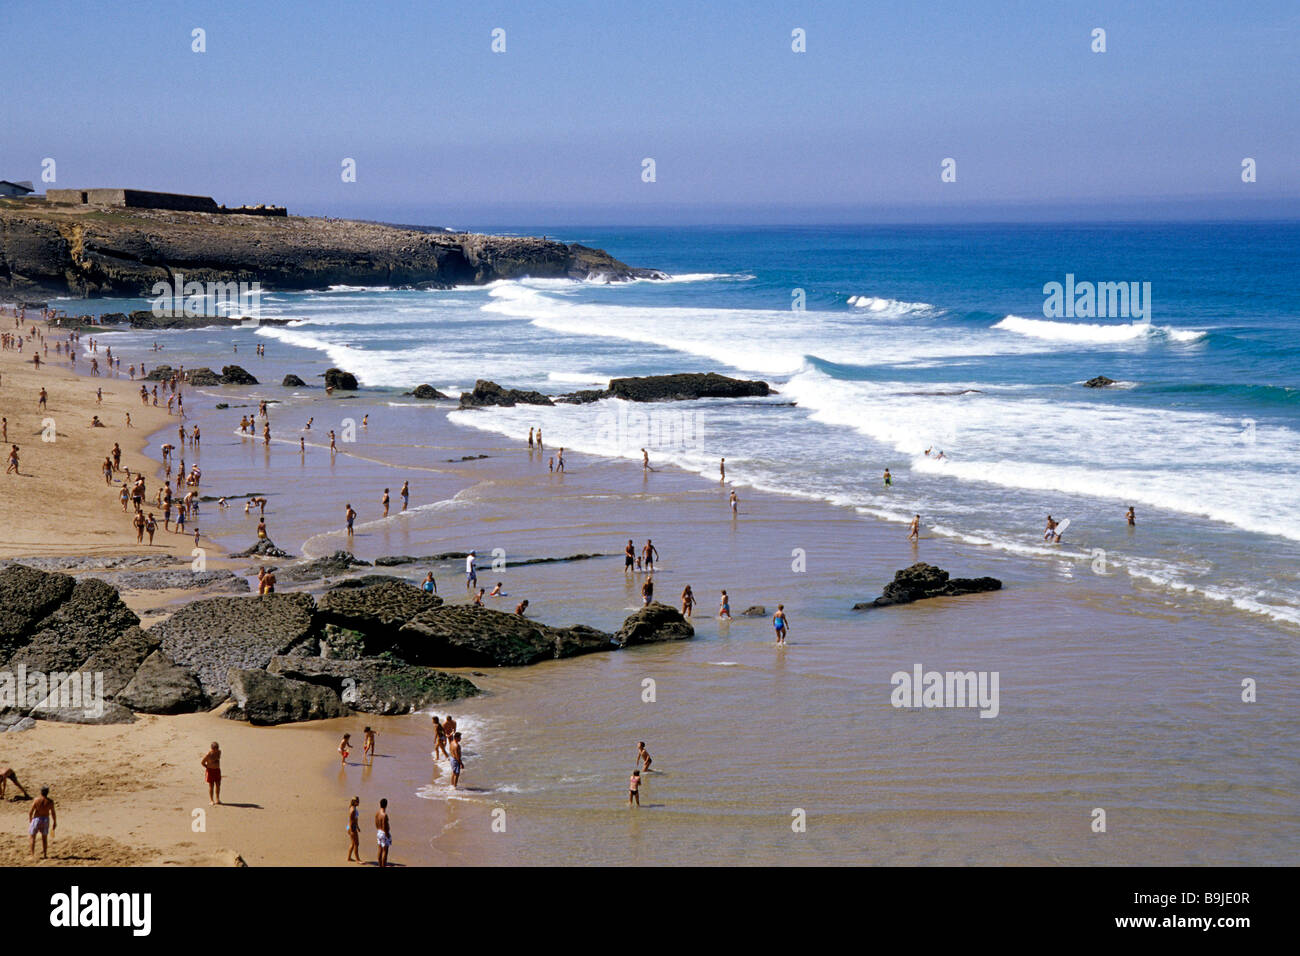 Praia do Guincho, beach on the Atlantic with day trippers from Cascais, Estoril and Lisbon, Portugal, Europe Stock Photo